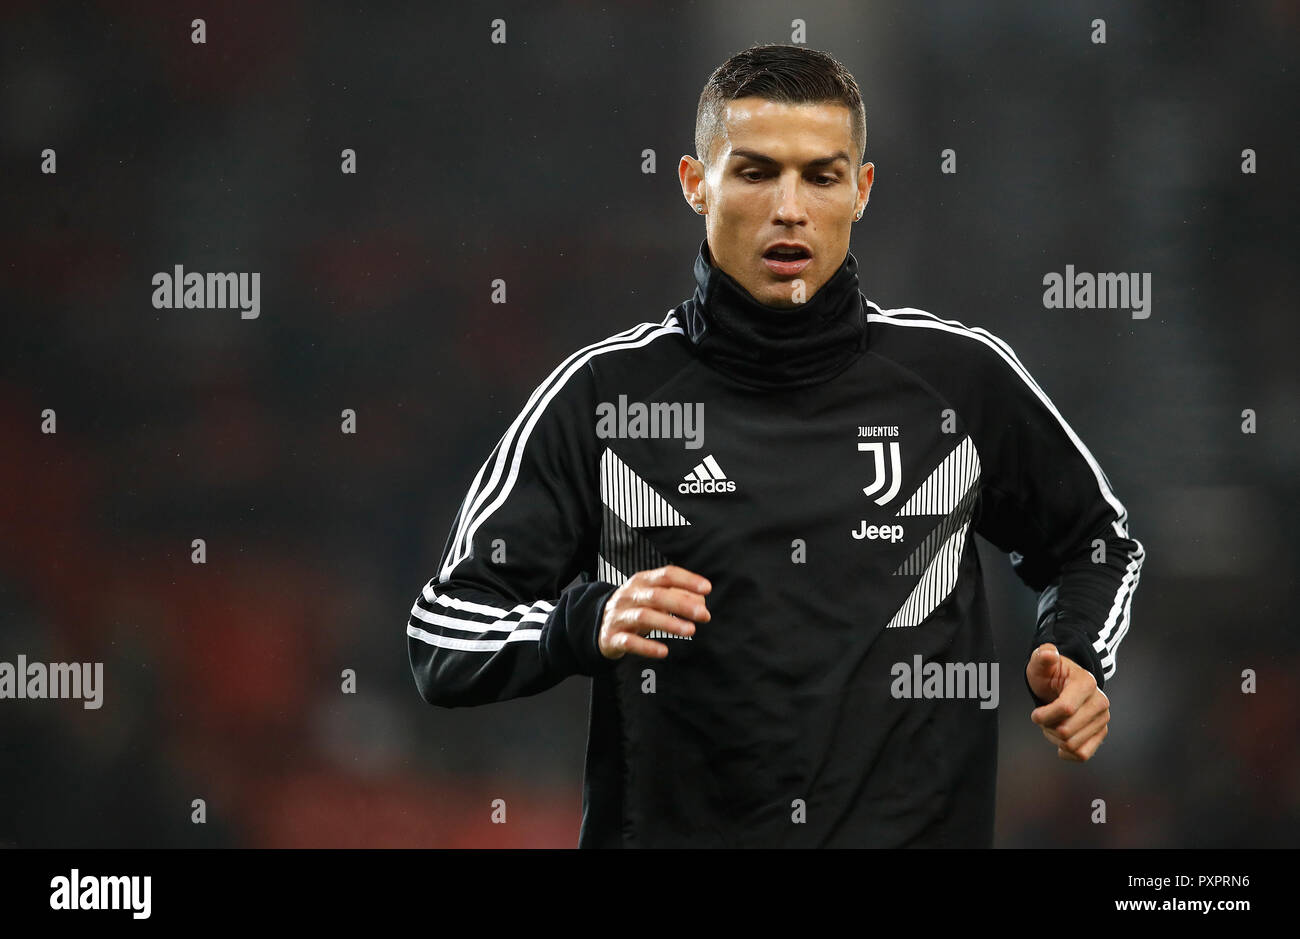 Juventus' Cristiano Ronaldo warming up before the UEFA Champions League  match at Old Trafford, Manchester Stock Photo - Alamy